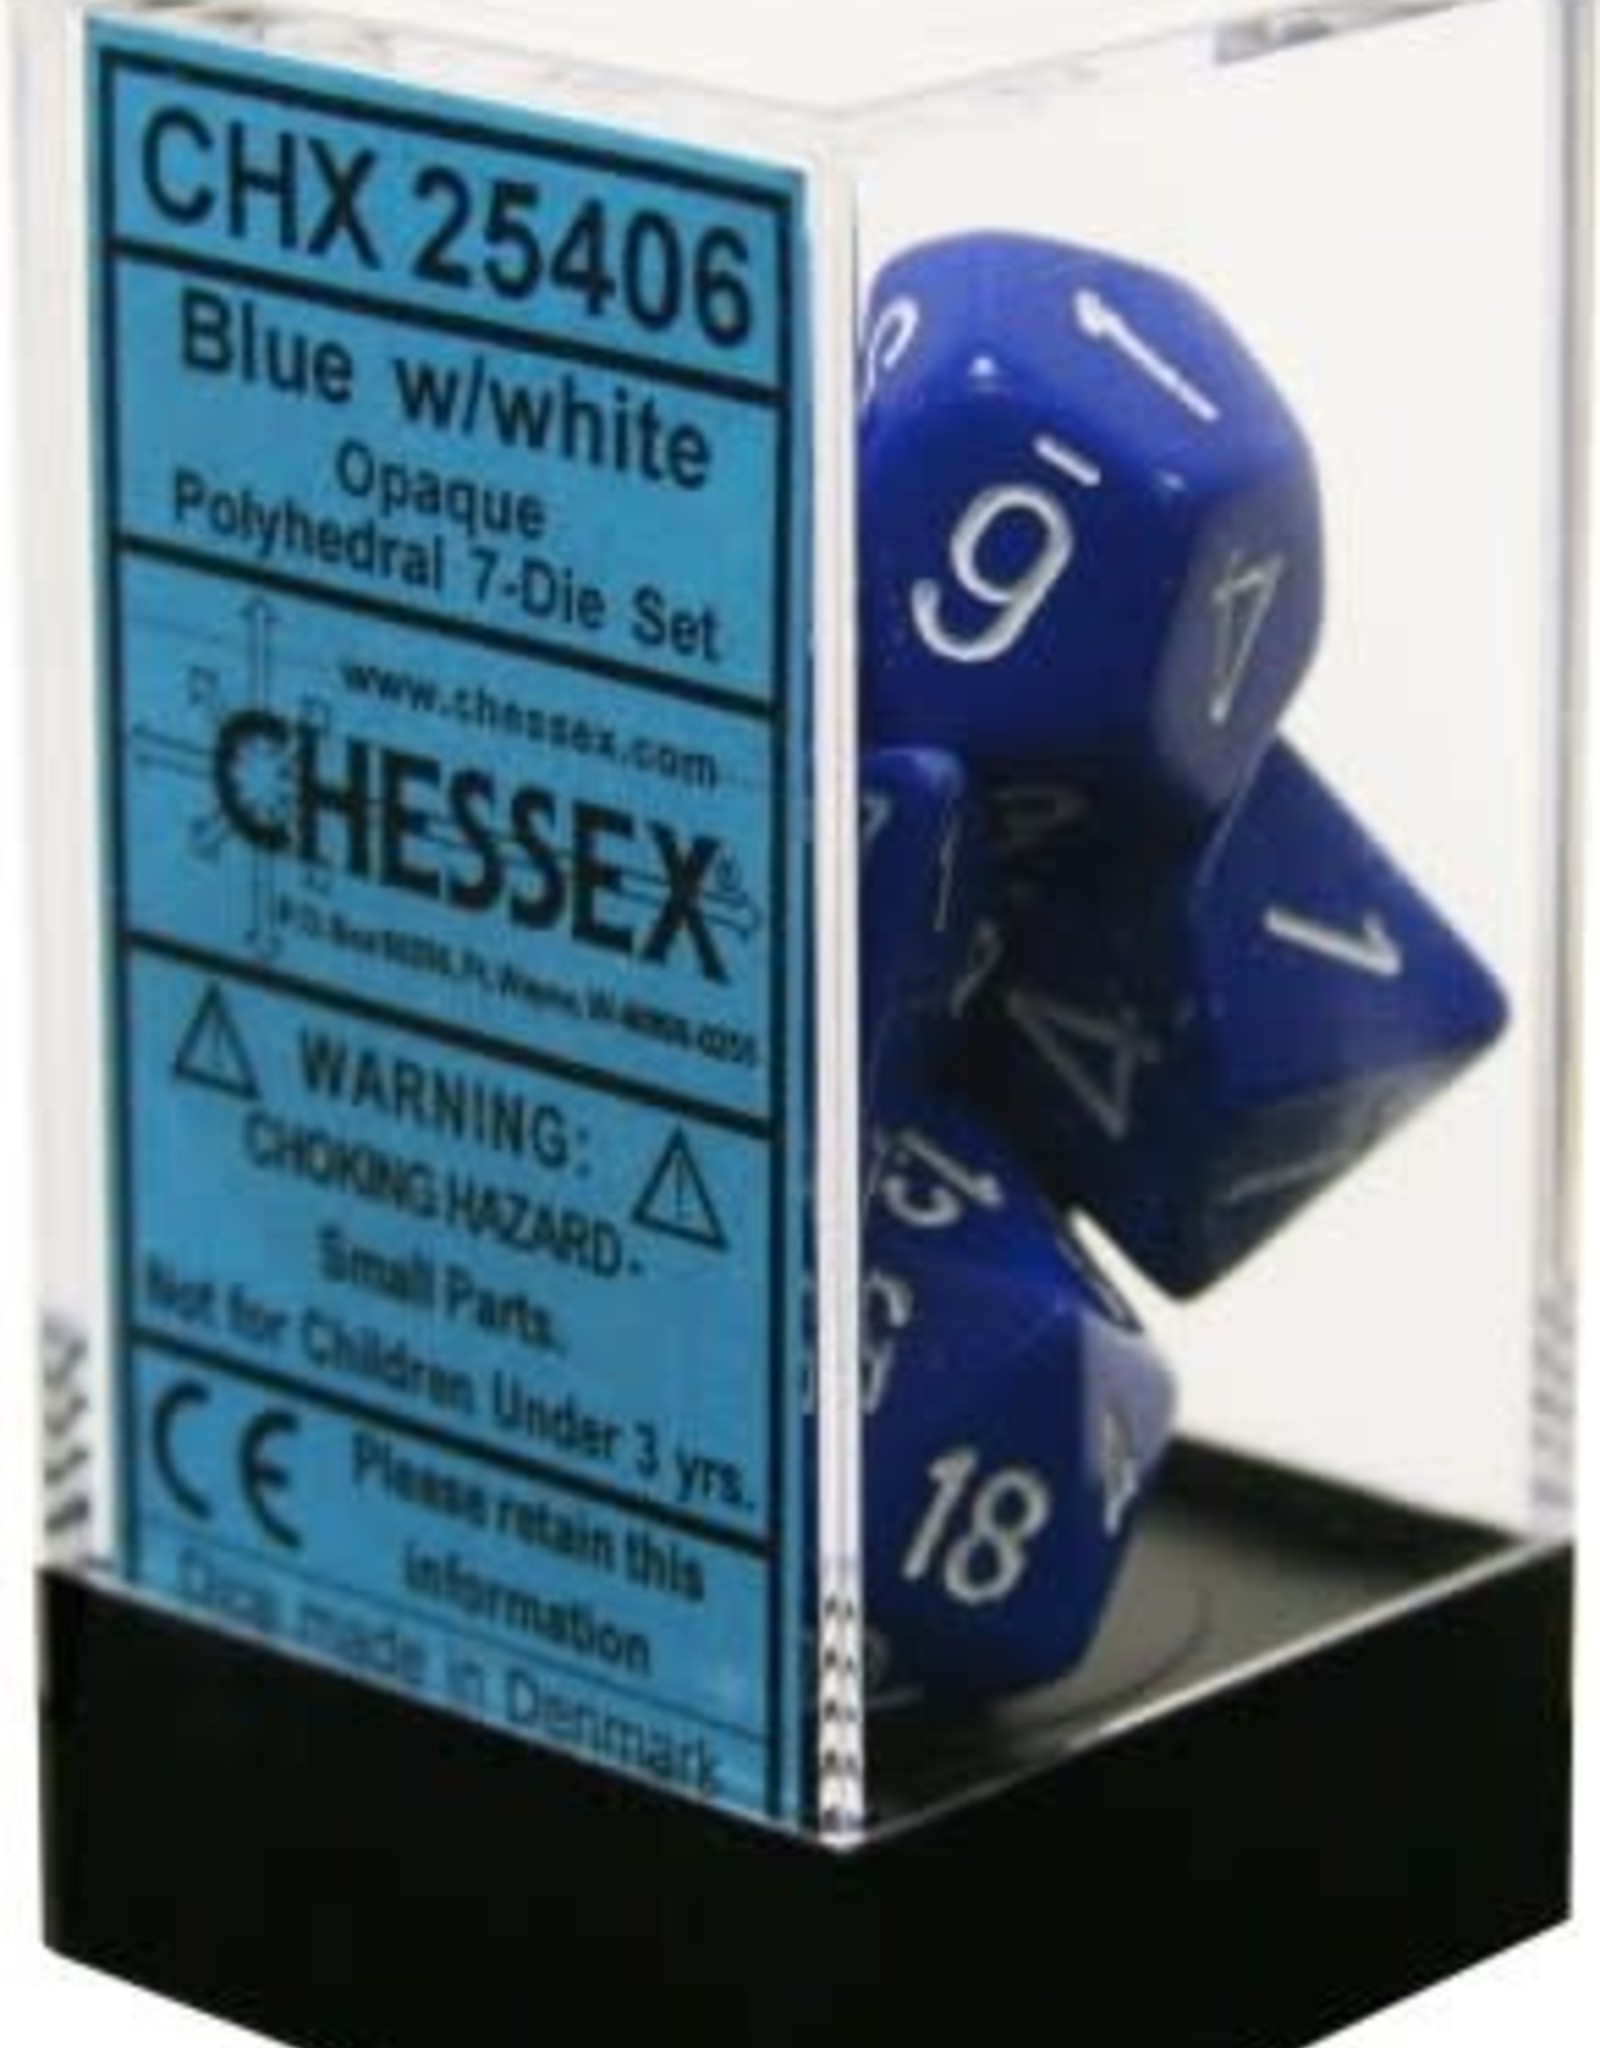 Chessex Chessex Opaque Dice (7) Blue/White